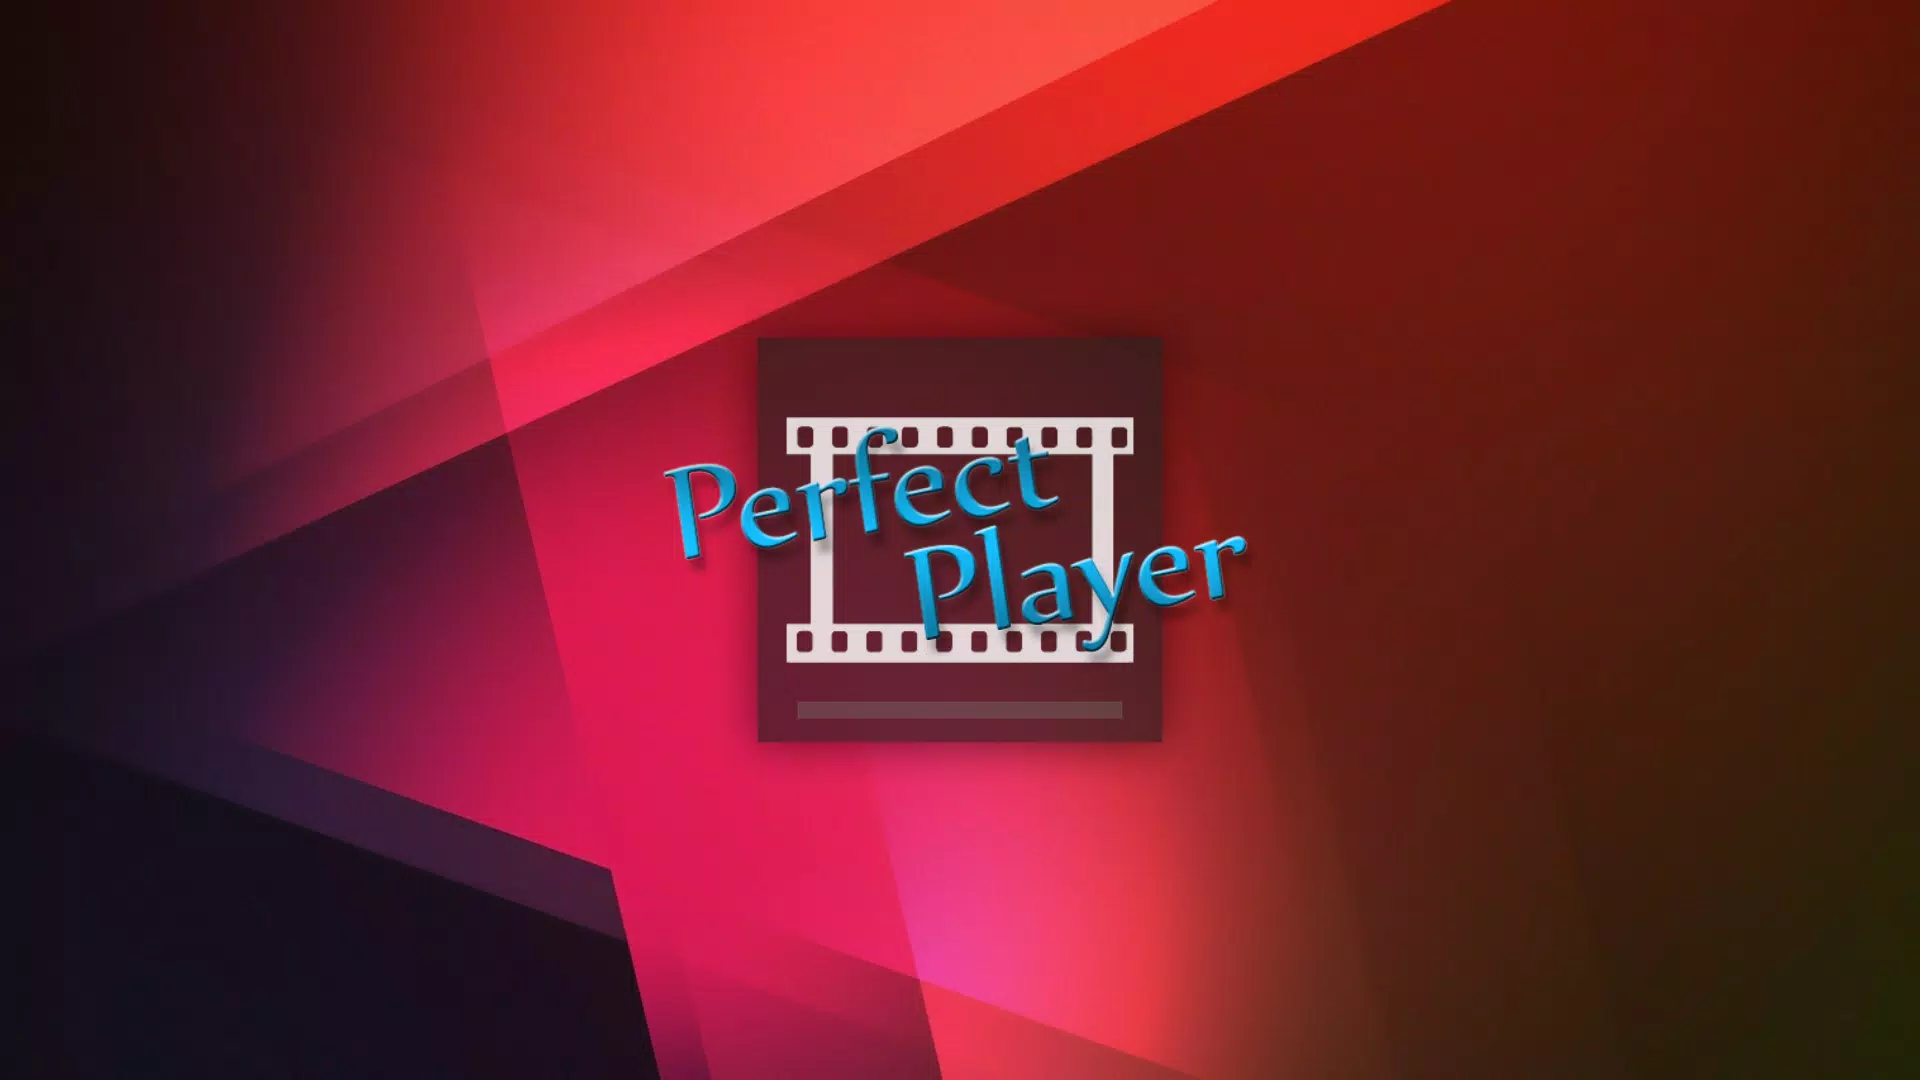 Perfect Player IPTV 1.5.2.3 APK Download by Niklabs Software